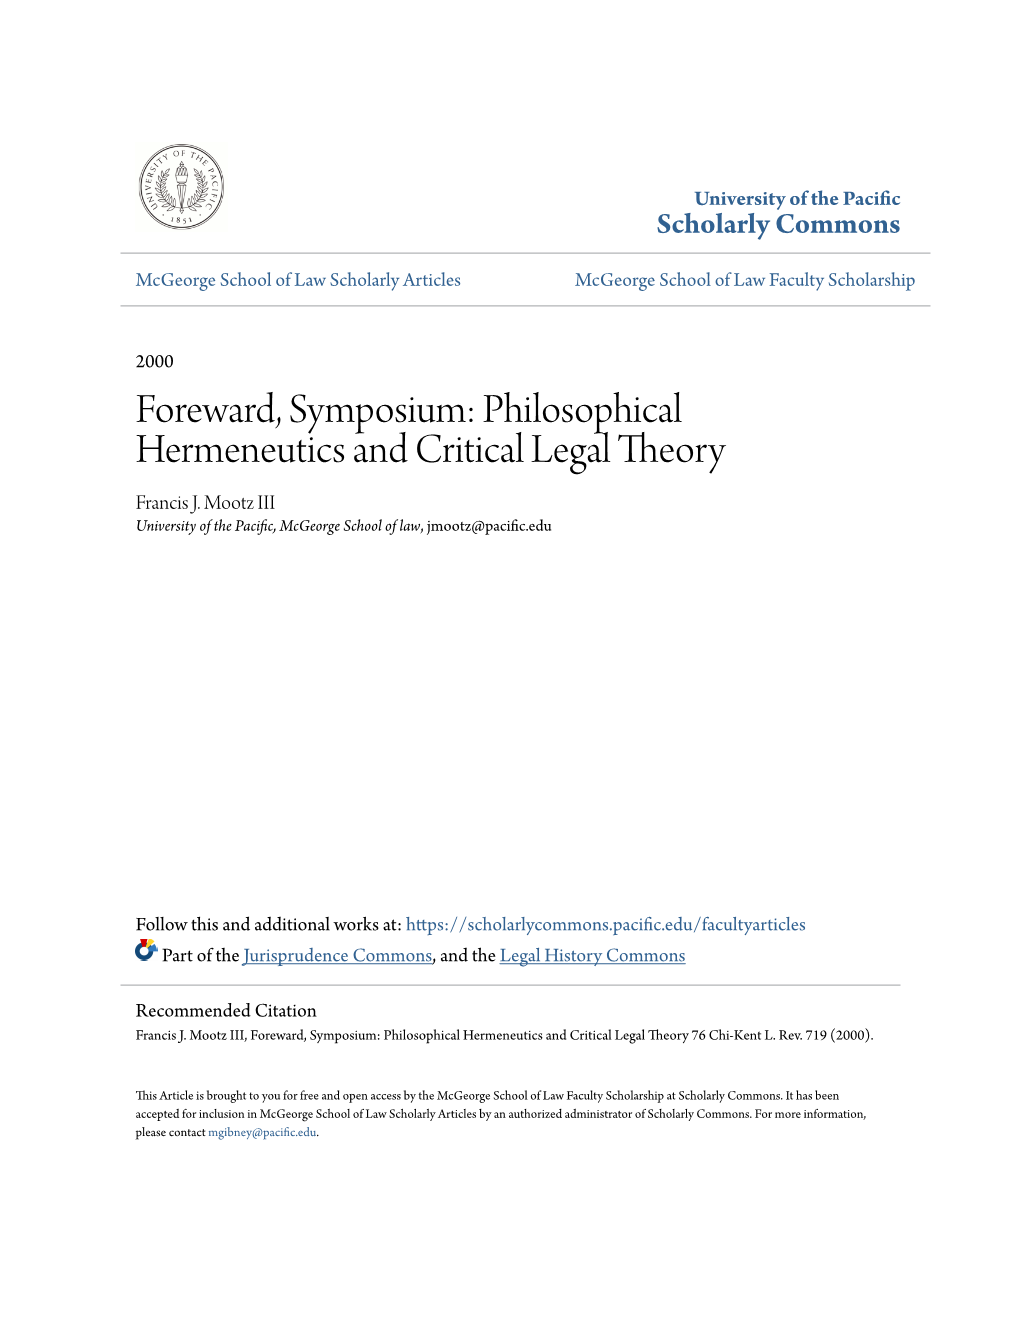 Philosophical Hermeneutics and Critical Legal Theory Francis J